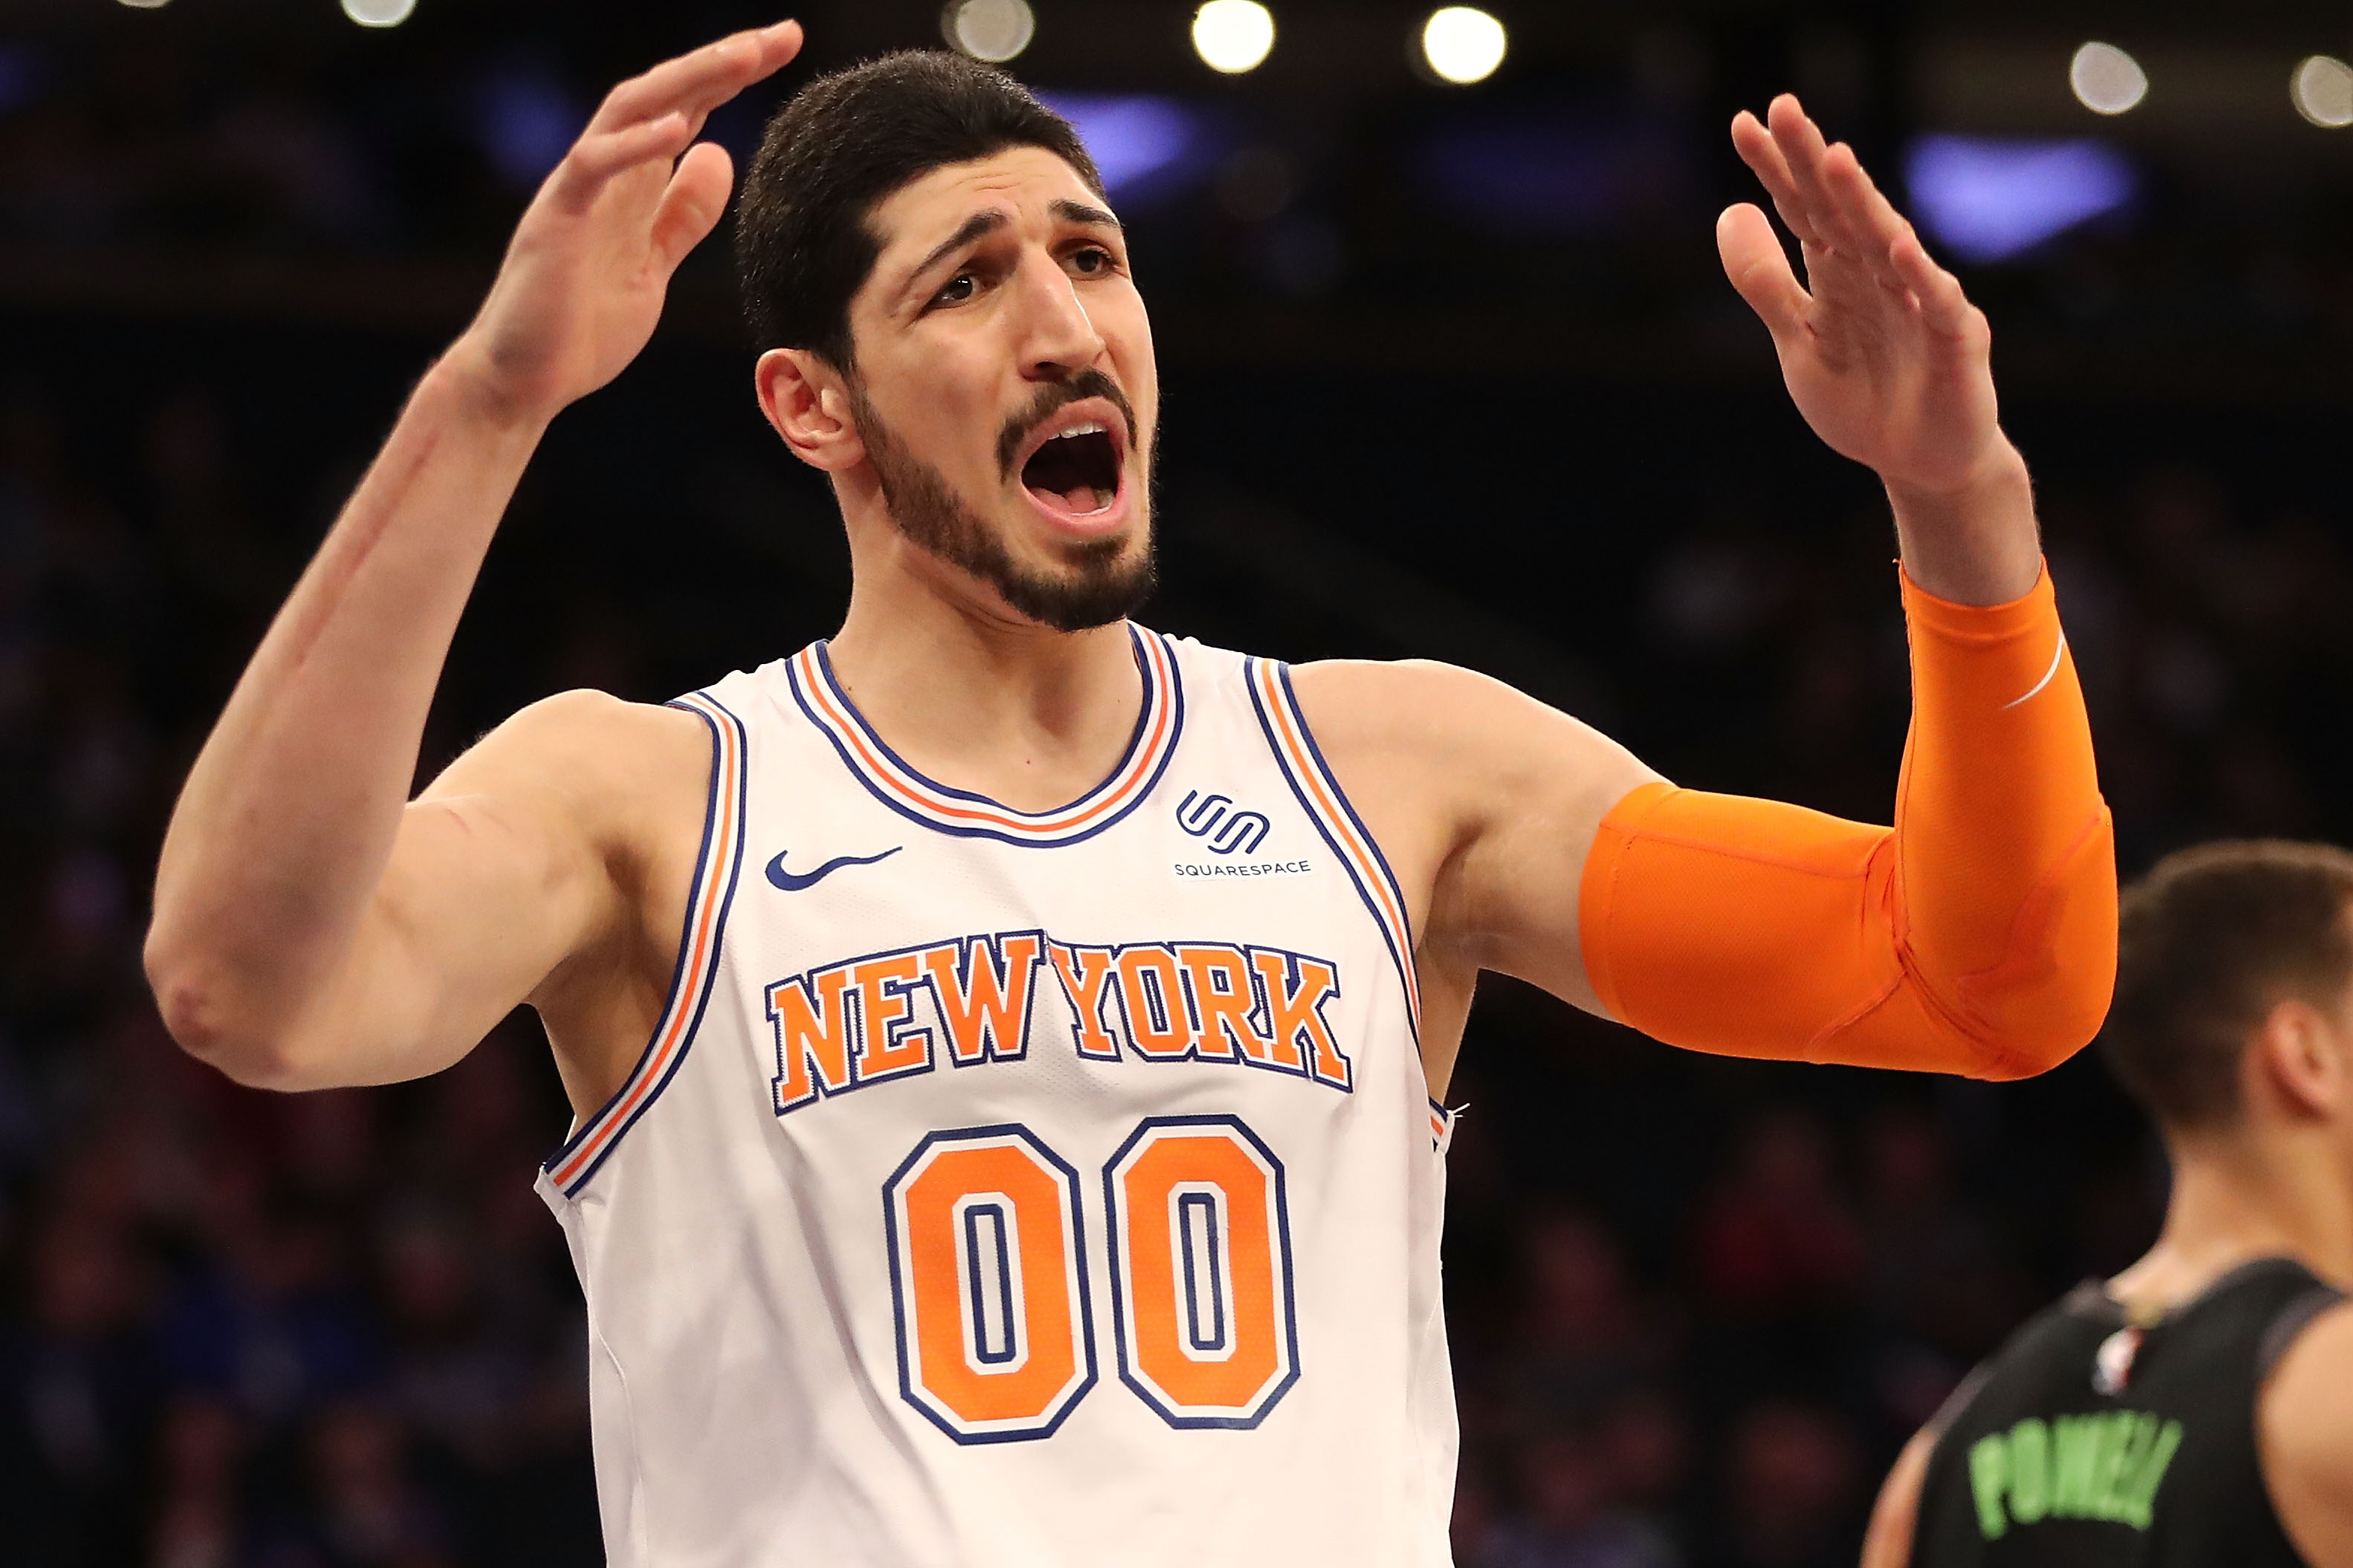 Enes Kanter #00 of the New York Knicks reacts in the second quarter against the Dallas Mavericks during their game at Madison Square Garden on March 13, 2018 in New York City. (Abbie Parr—Getty Images)